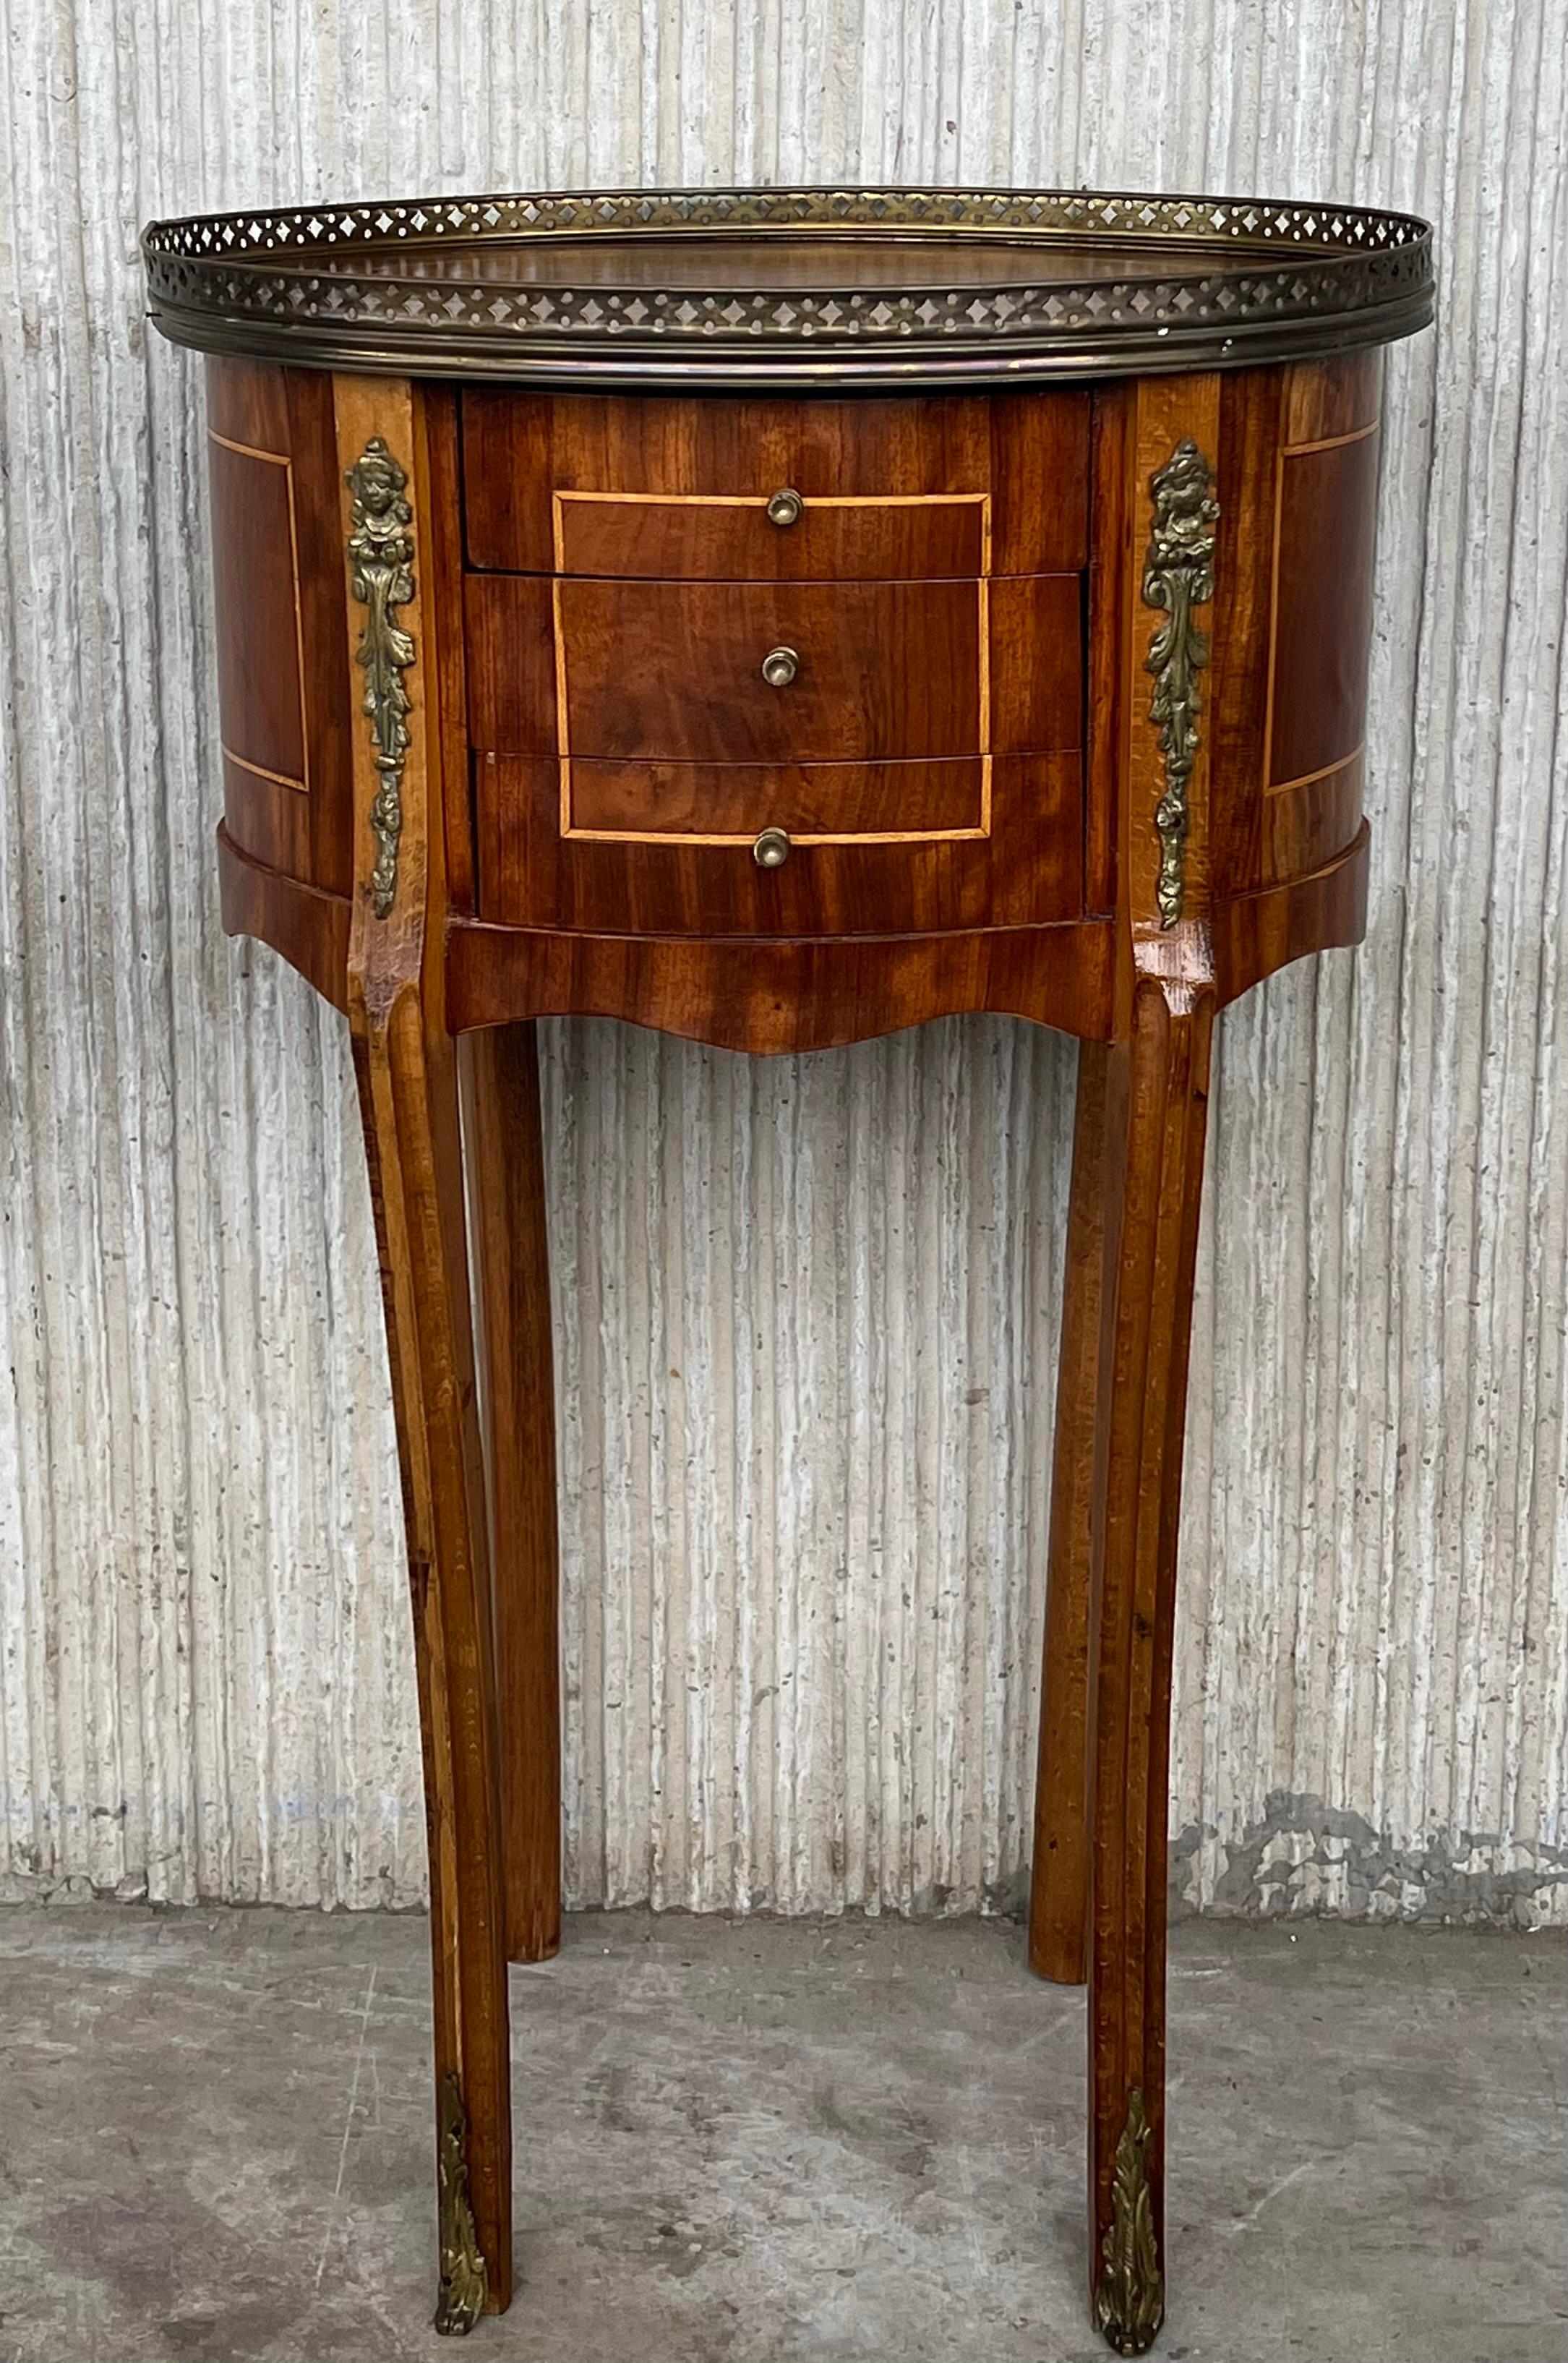 French Louis XVI style side table or nightstand topped with marquetry top, fluted legs finished with golden bronze clogs. Three dovetailed small drawers with brass details.